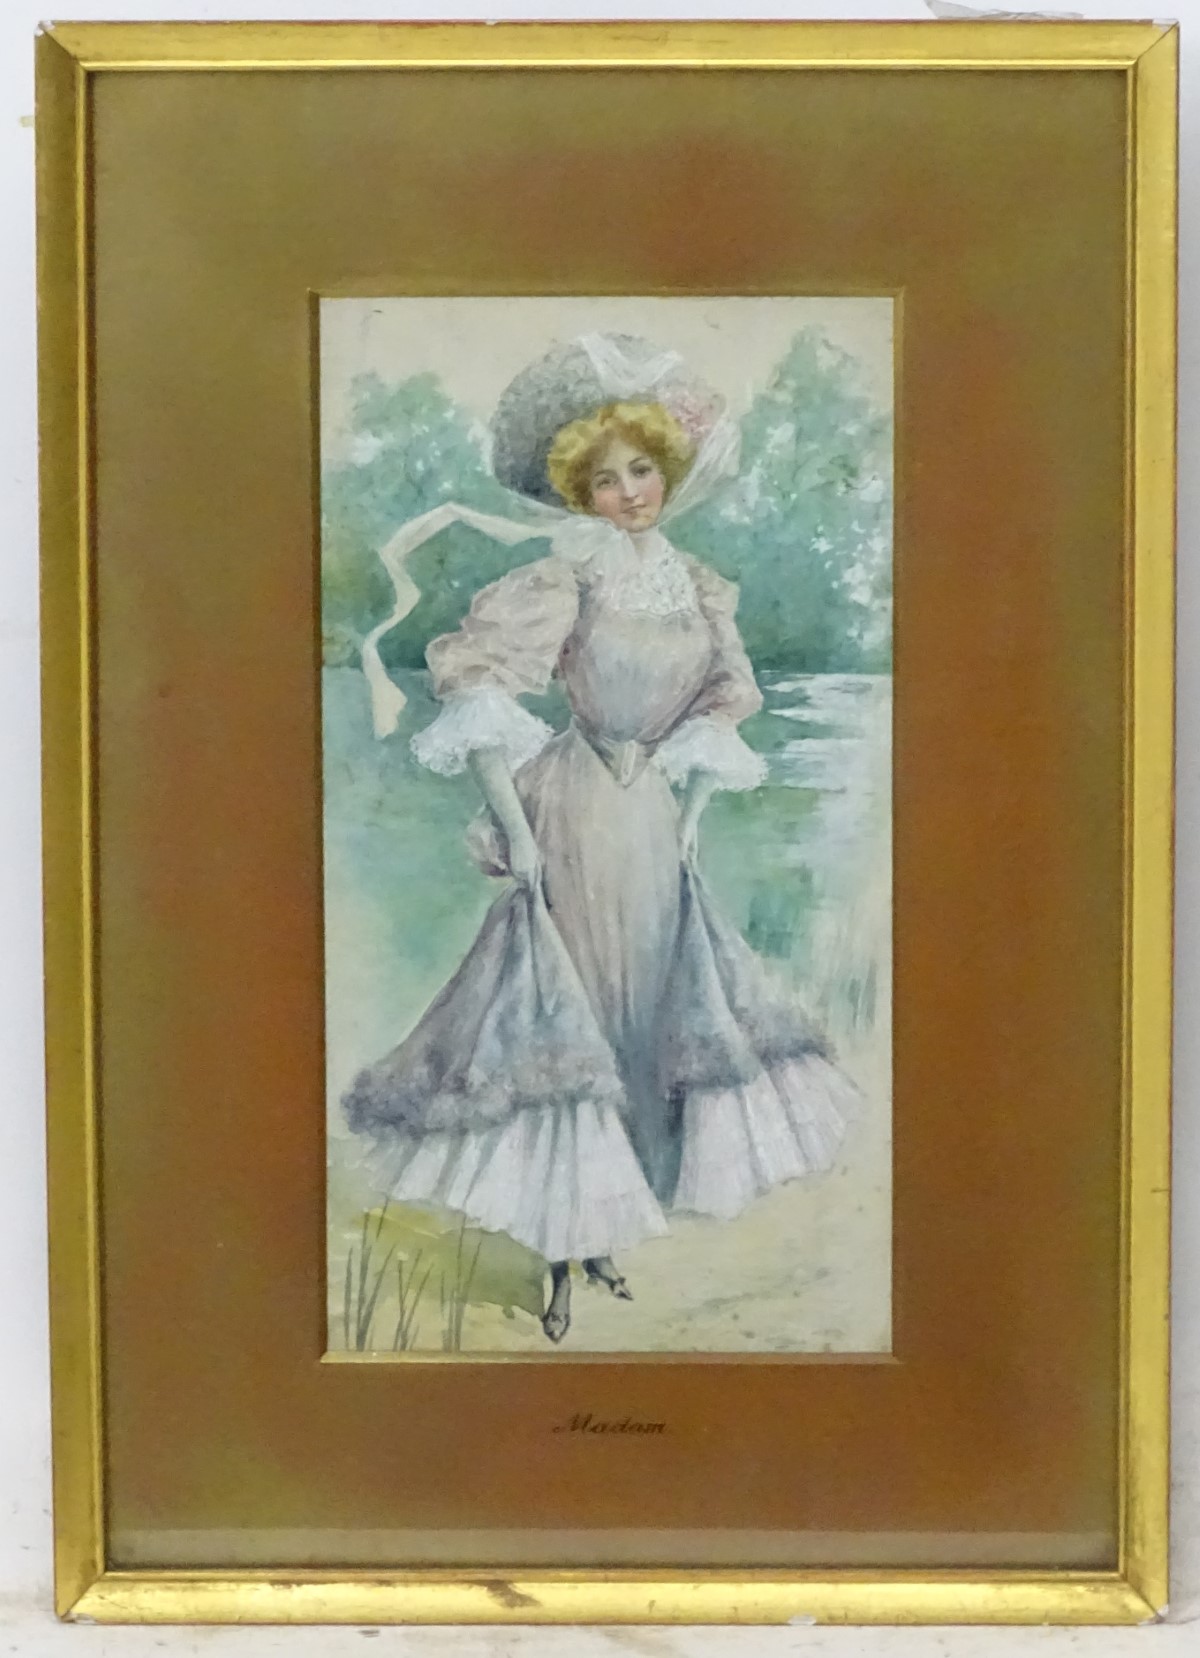 Indistinctly Signed, Watercolour and gouache, 'Madam' portrait of an Edwardian lady, - Image 3 of 7